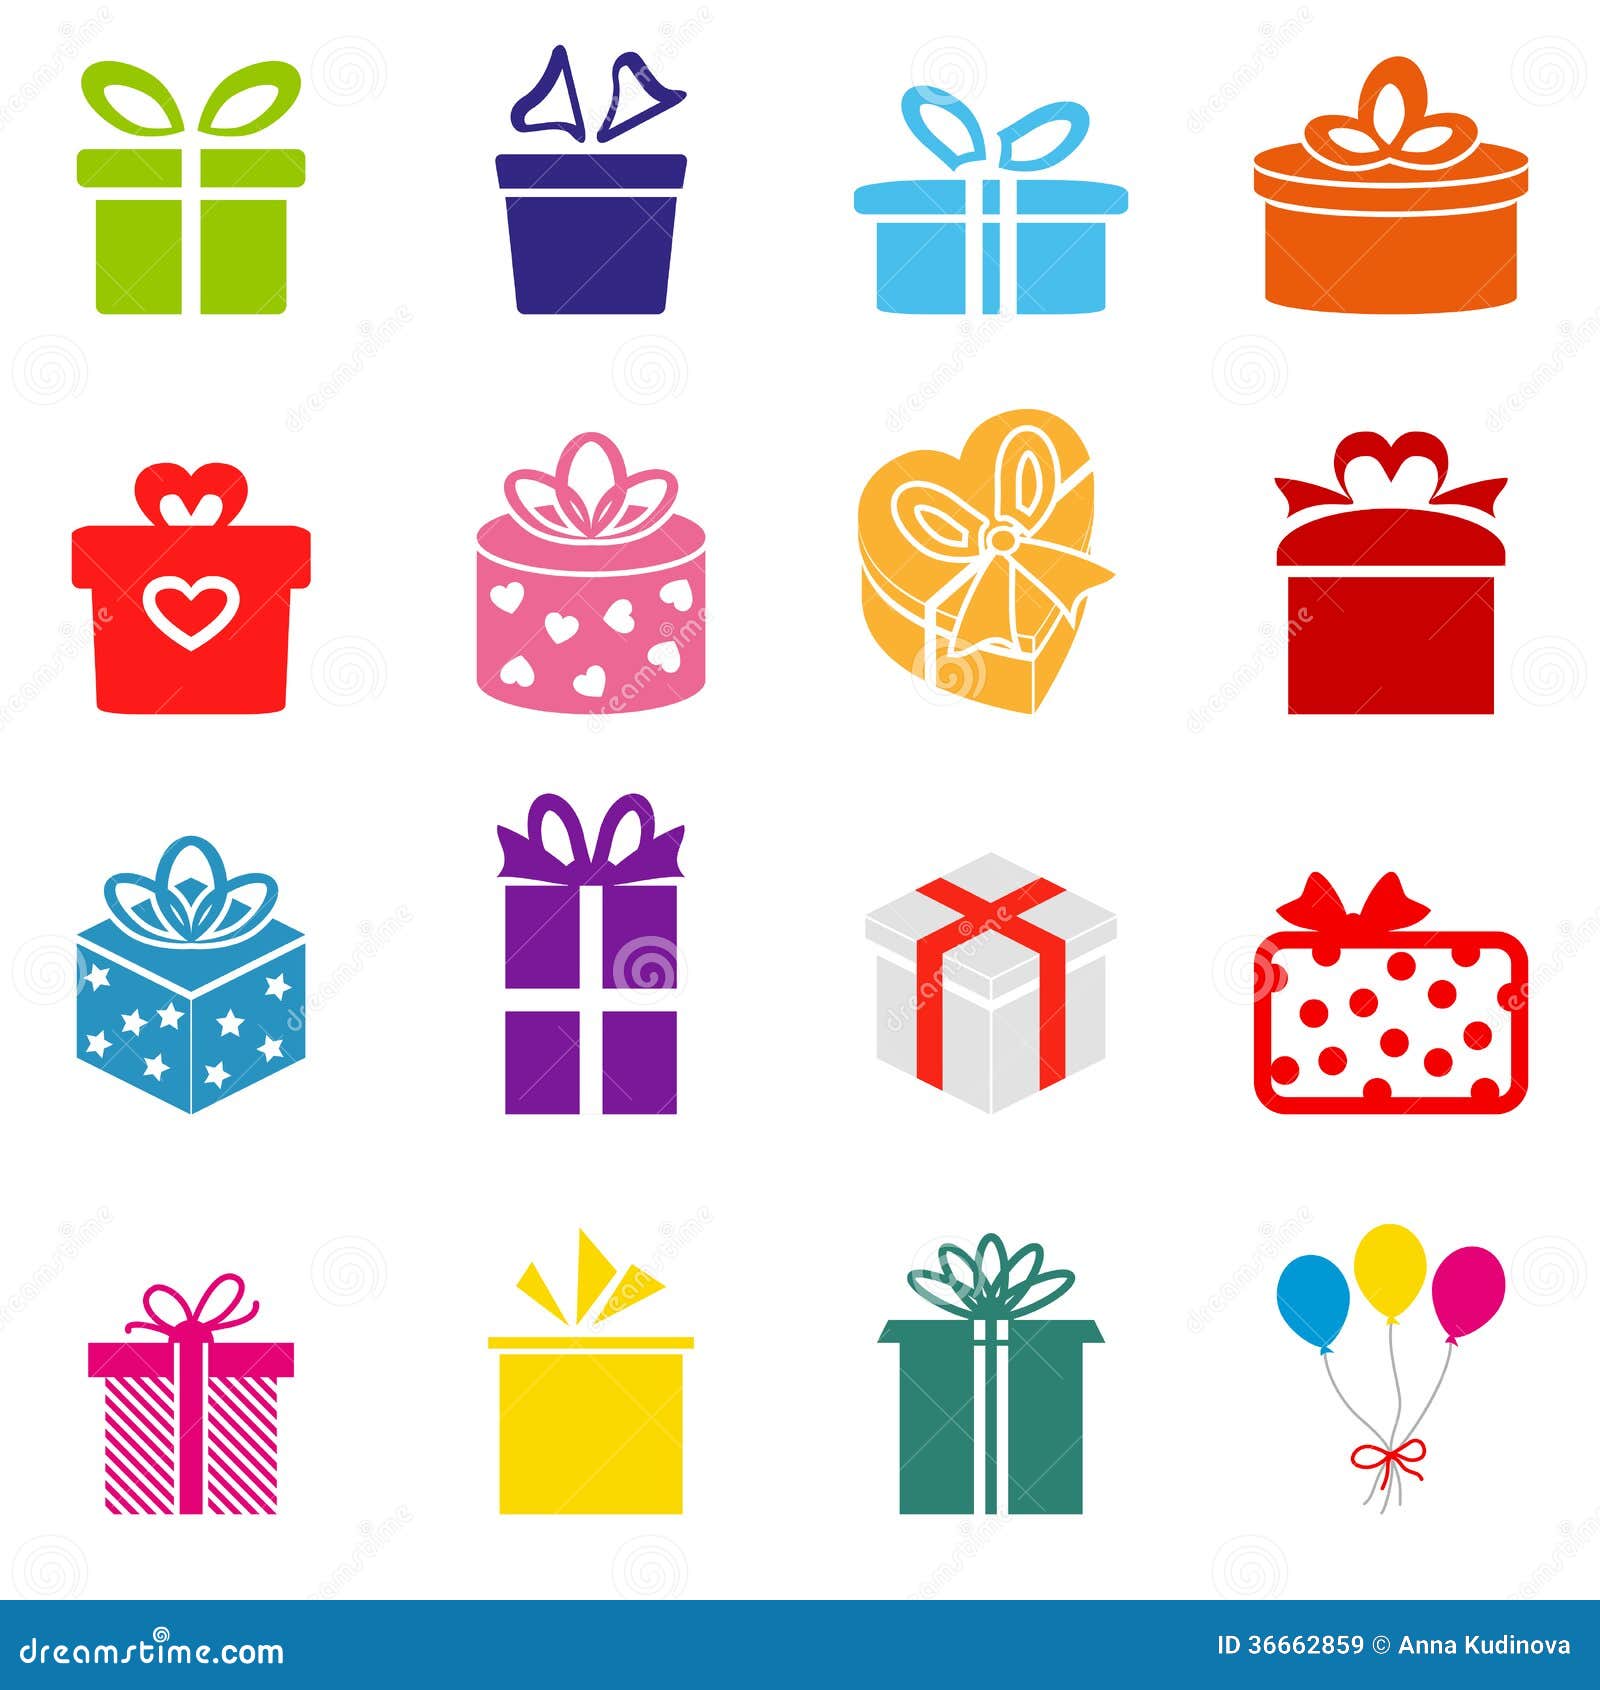 vector free download gift box - photo #16